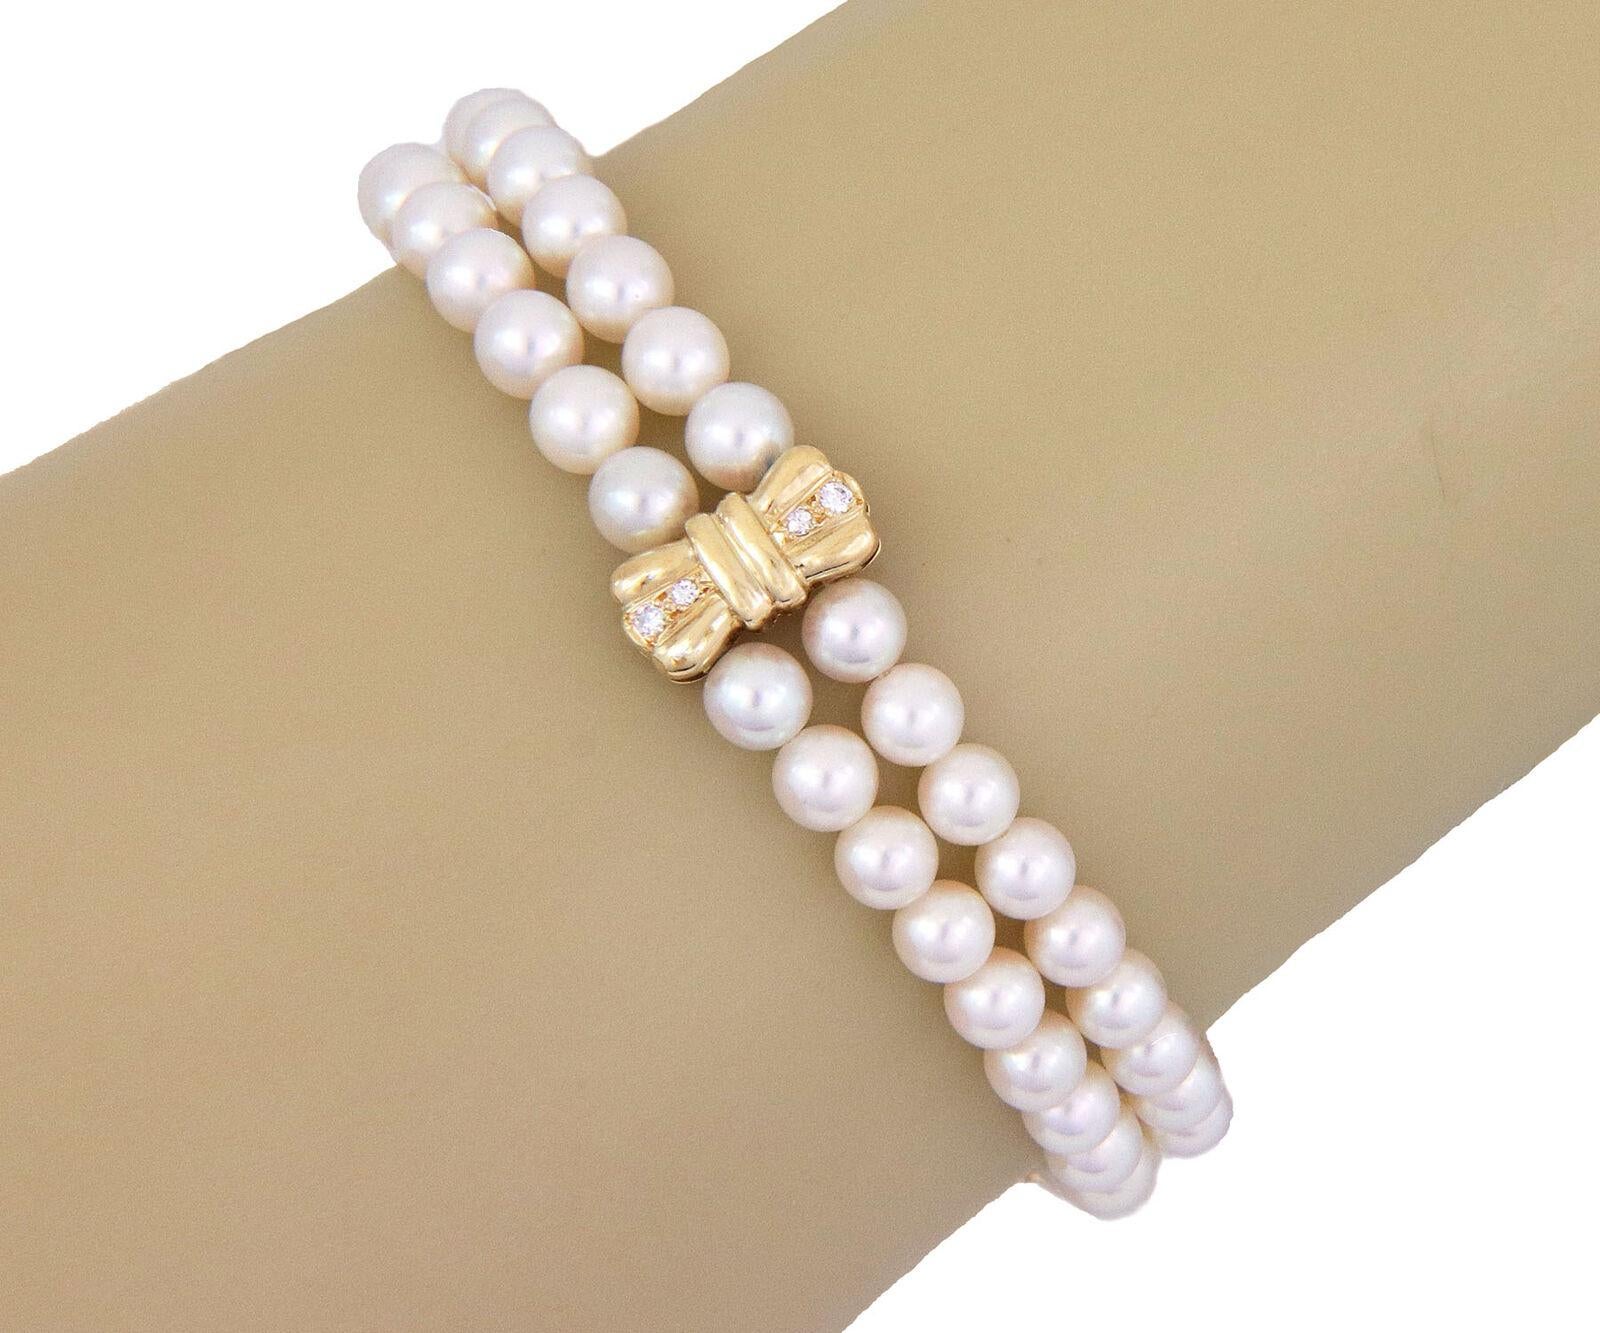 Mikimoto Diamond Pearls 18k Yellow Gold Bow Motif 2 Strand Bracelet In Excellent Condition For Sale In Boca Raton, FL